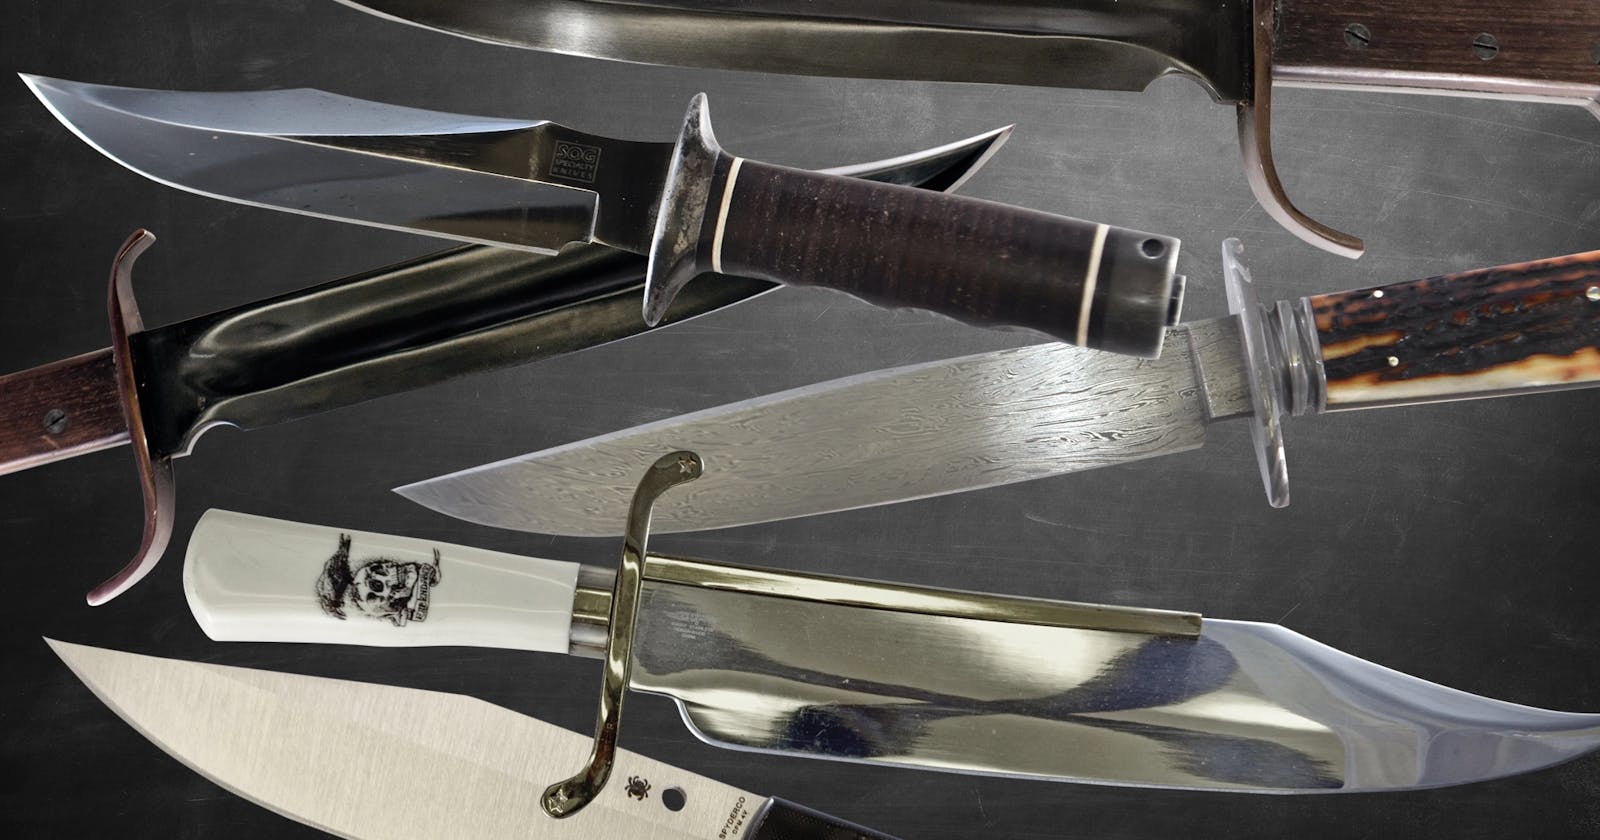 Bowie Knife: The All-Purpose Blade with a Rich History and Enduring Appeal